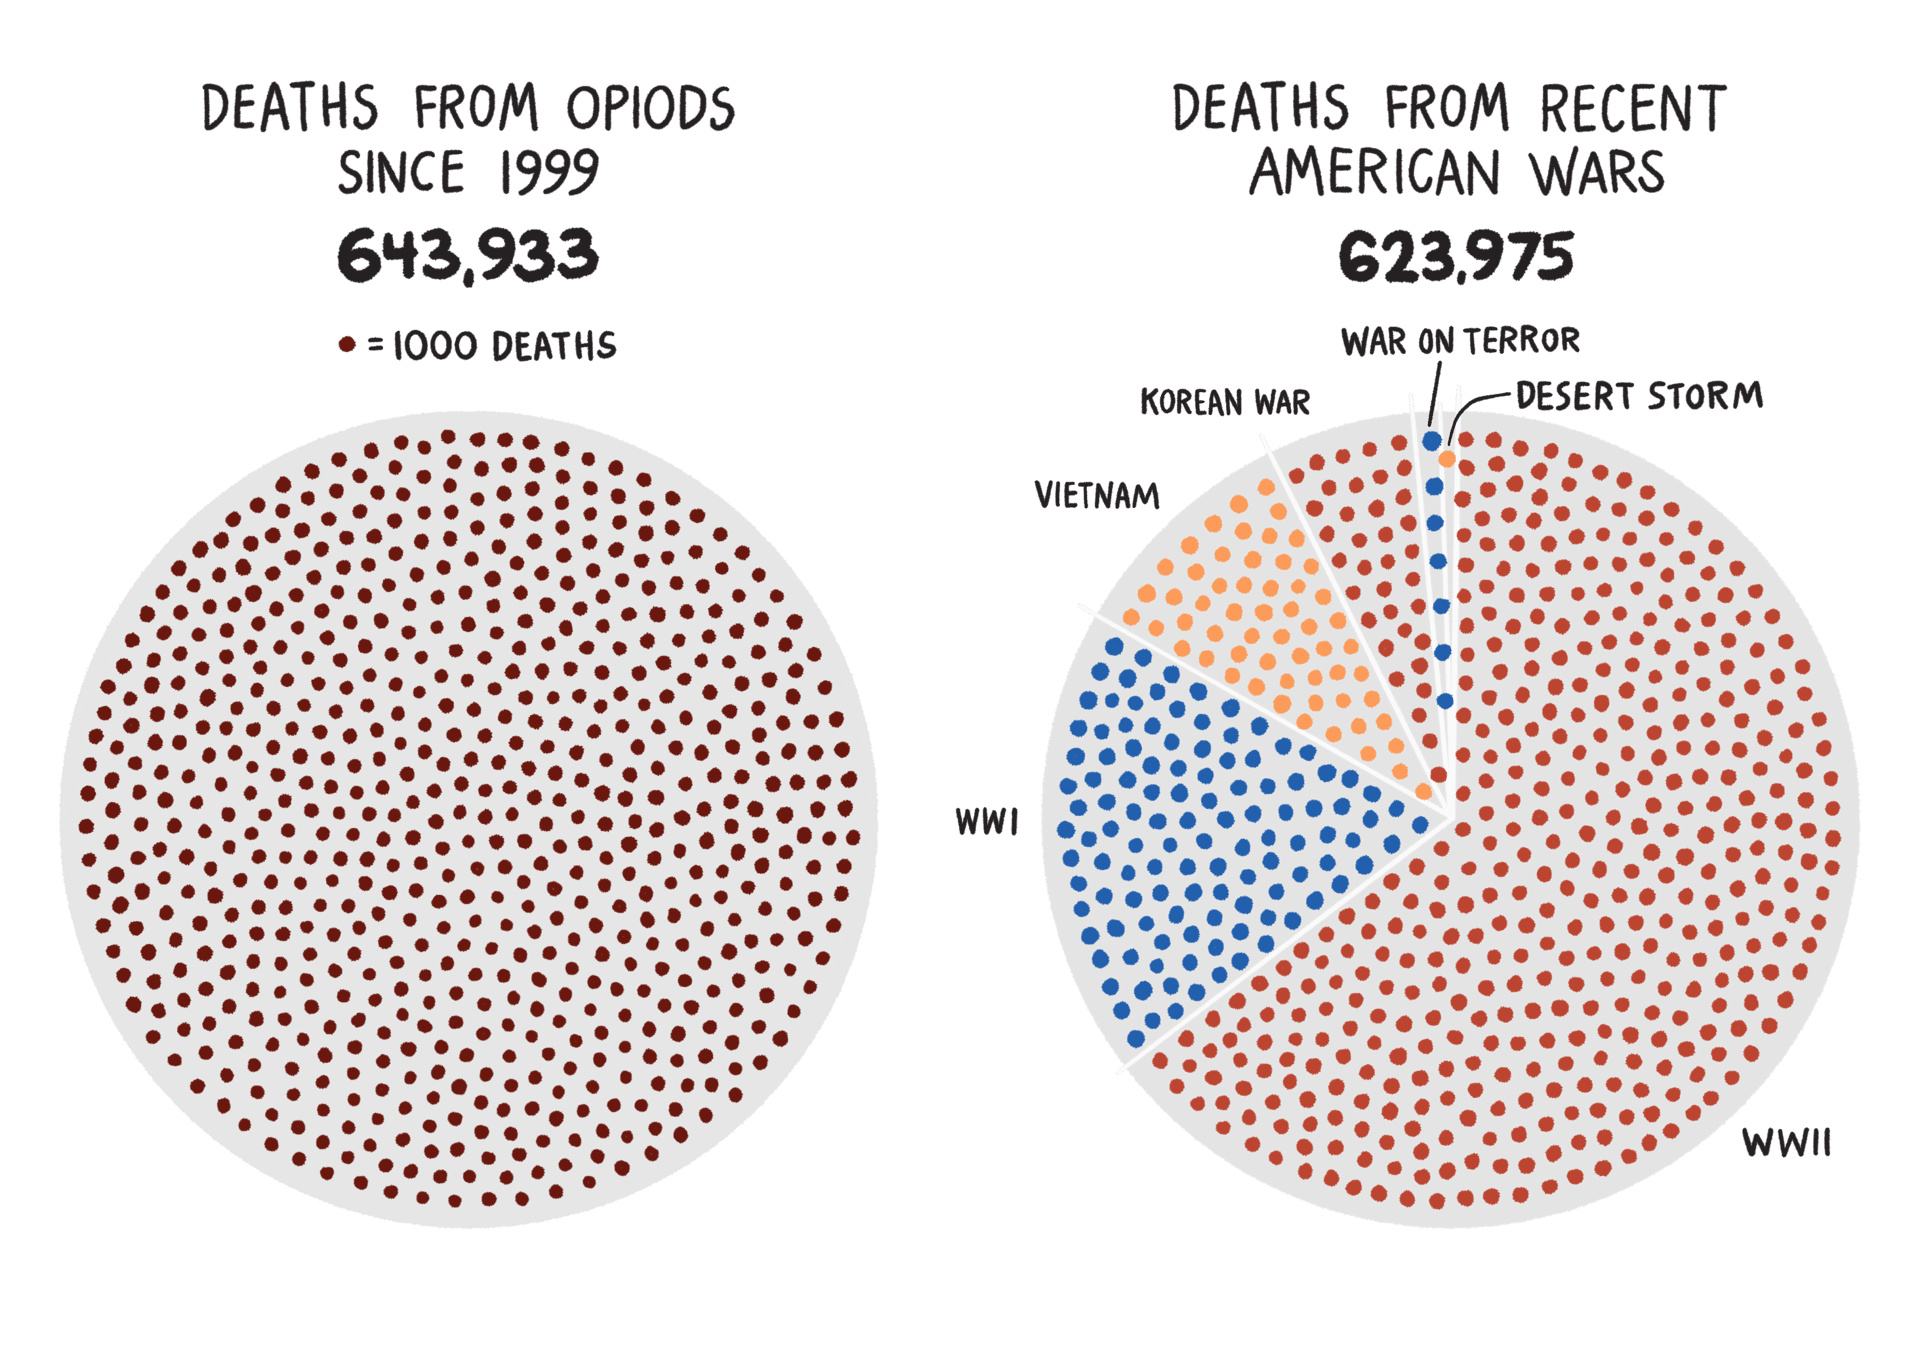 Side-by-side circle dot charts representing the number of deaths from opioids and the number of American military casualties from recent wars including WWI, WWII, Vietnam, Korean War, Desert Storm, and the War on Terror. 643,933 people died from opioids since 1999 and 623,975 people died from these recent American wars.